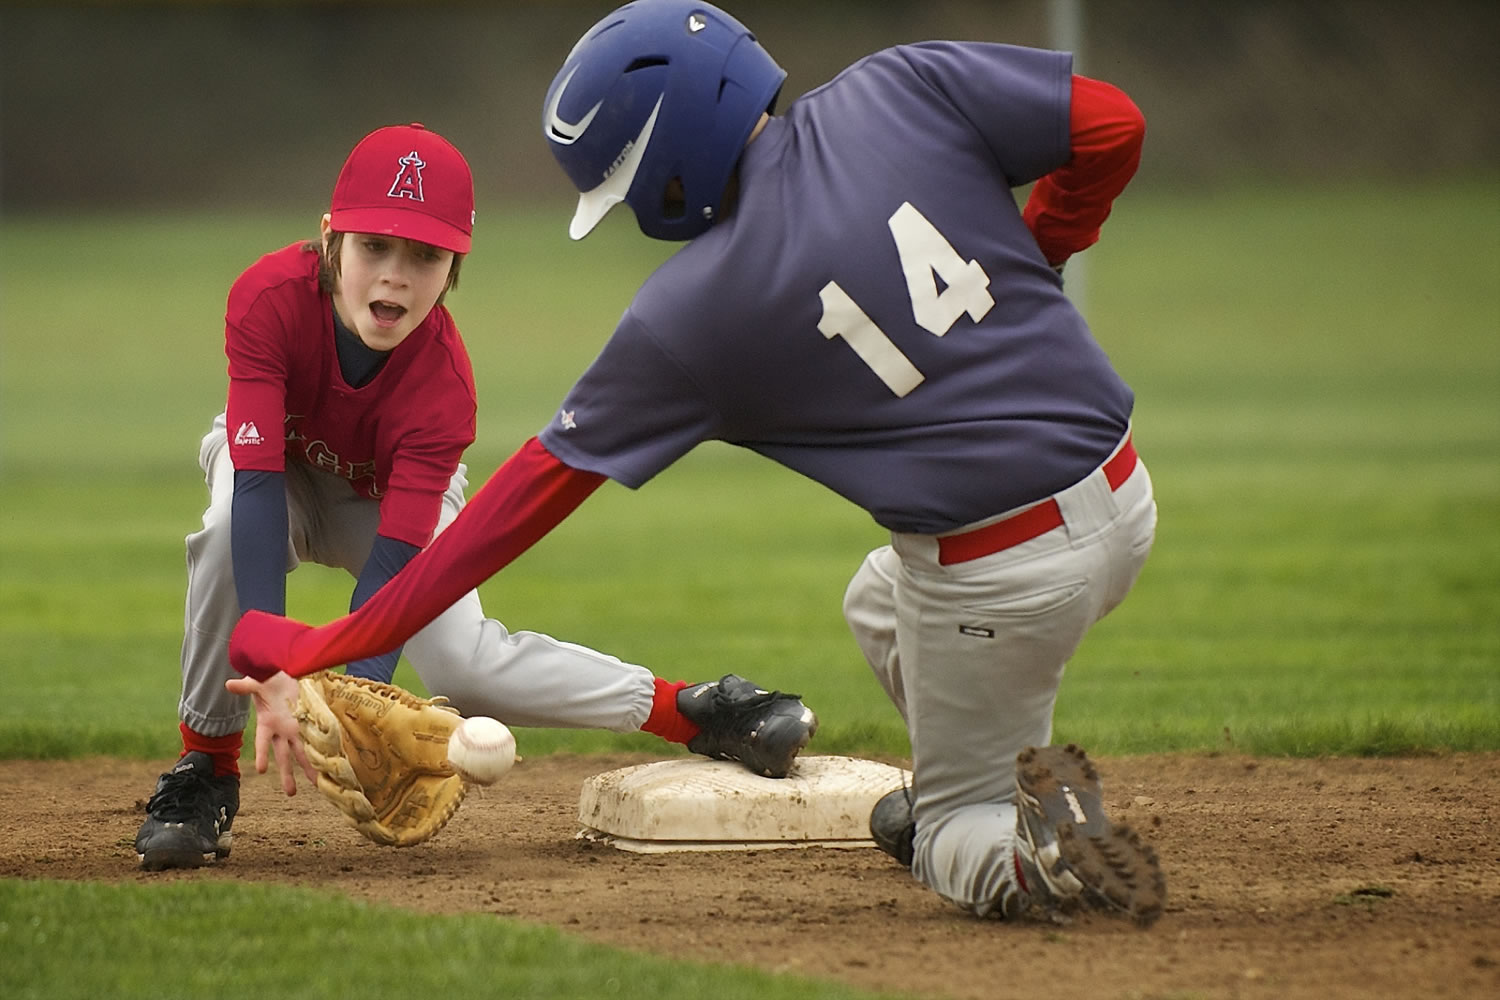 Angels shortstop Corbin Sarvela, 10, awaits the throw as Red Sox runner Cole Bain, 10, steals second base during Hazel Dell Little League's opening-day action.